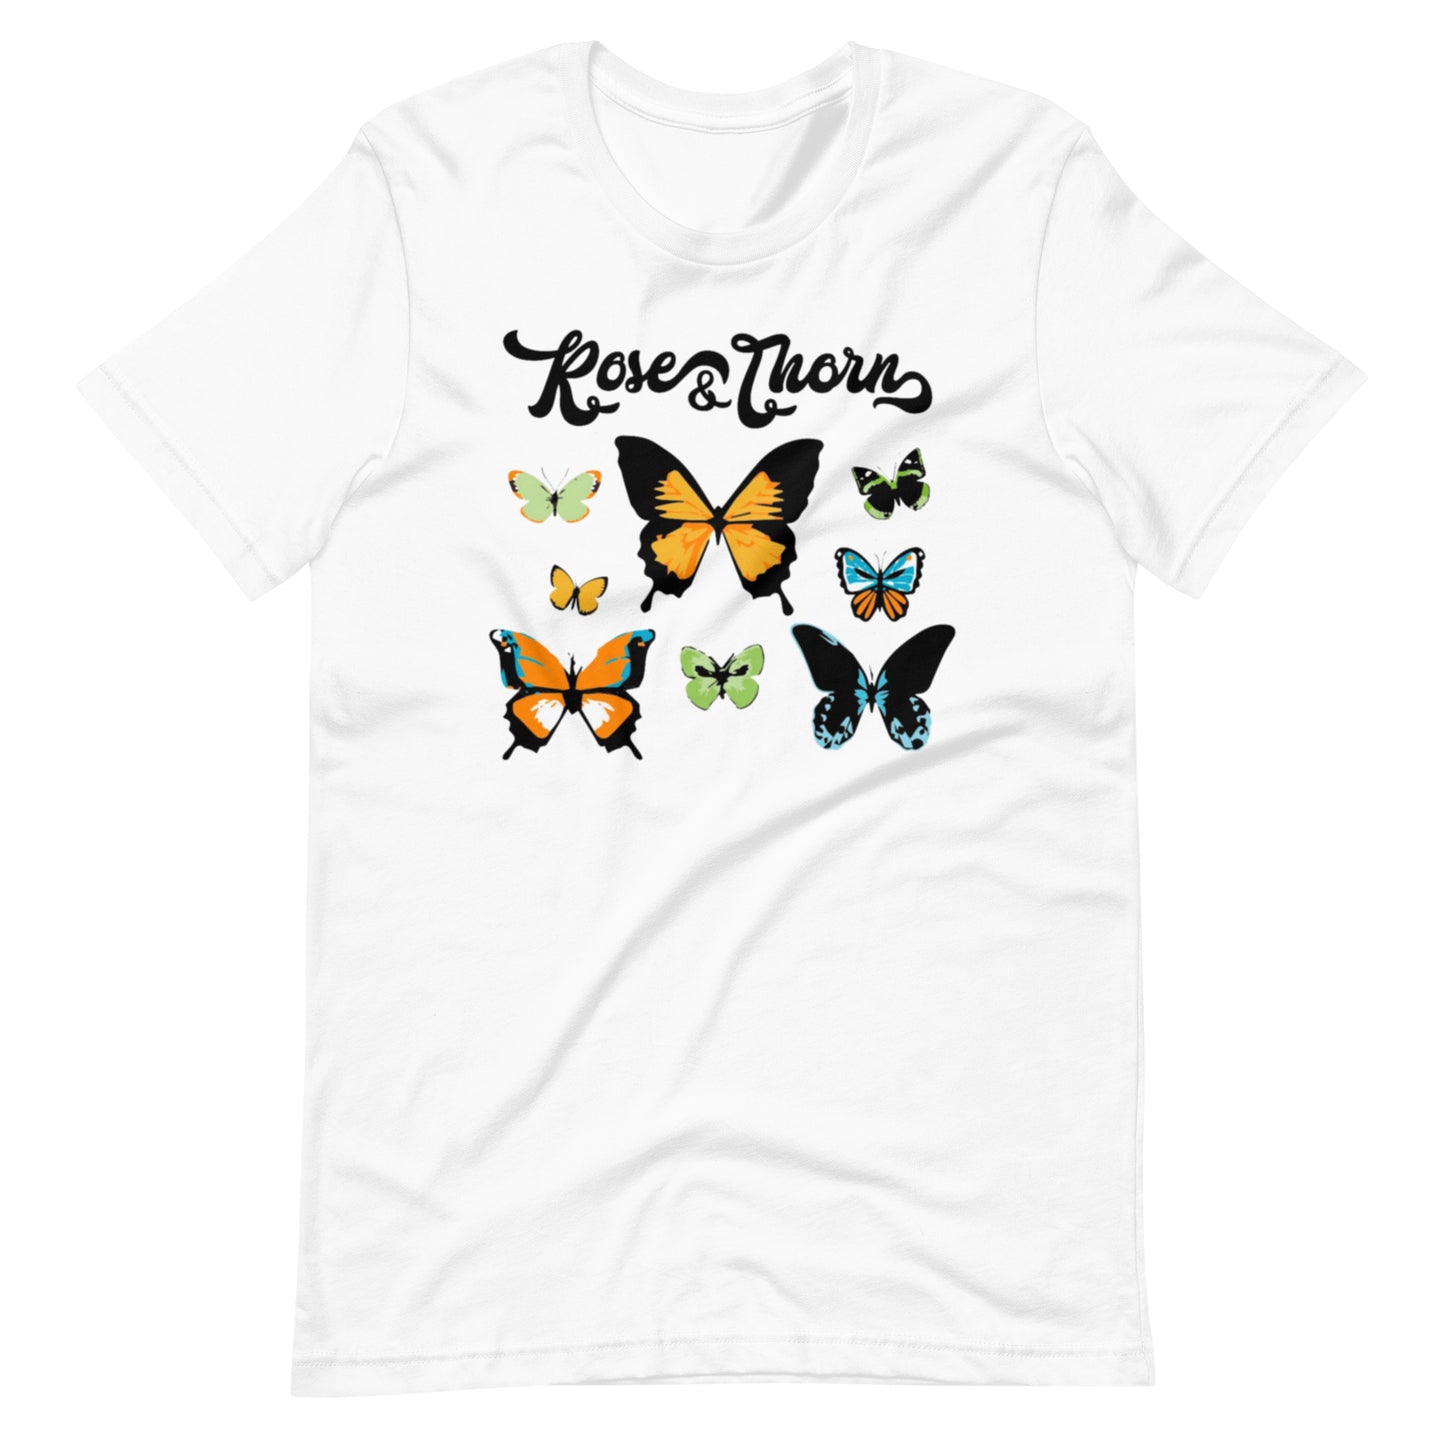 Rose & Thorn Butterfly Tee